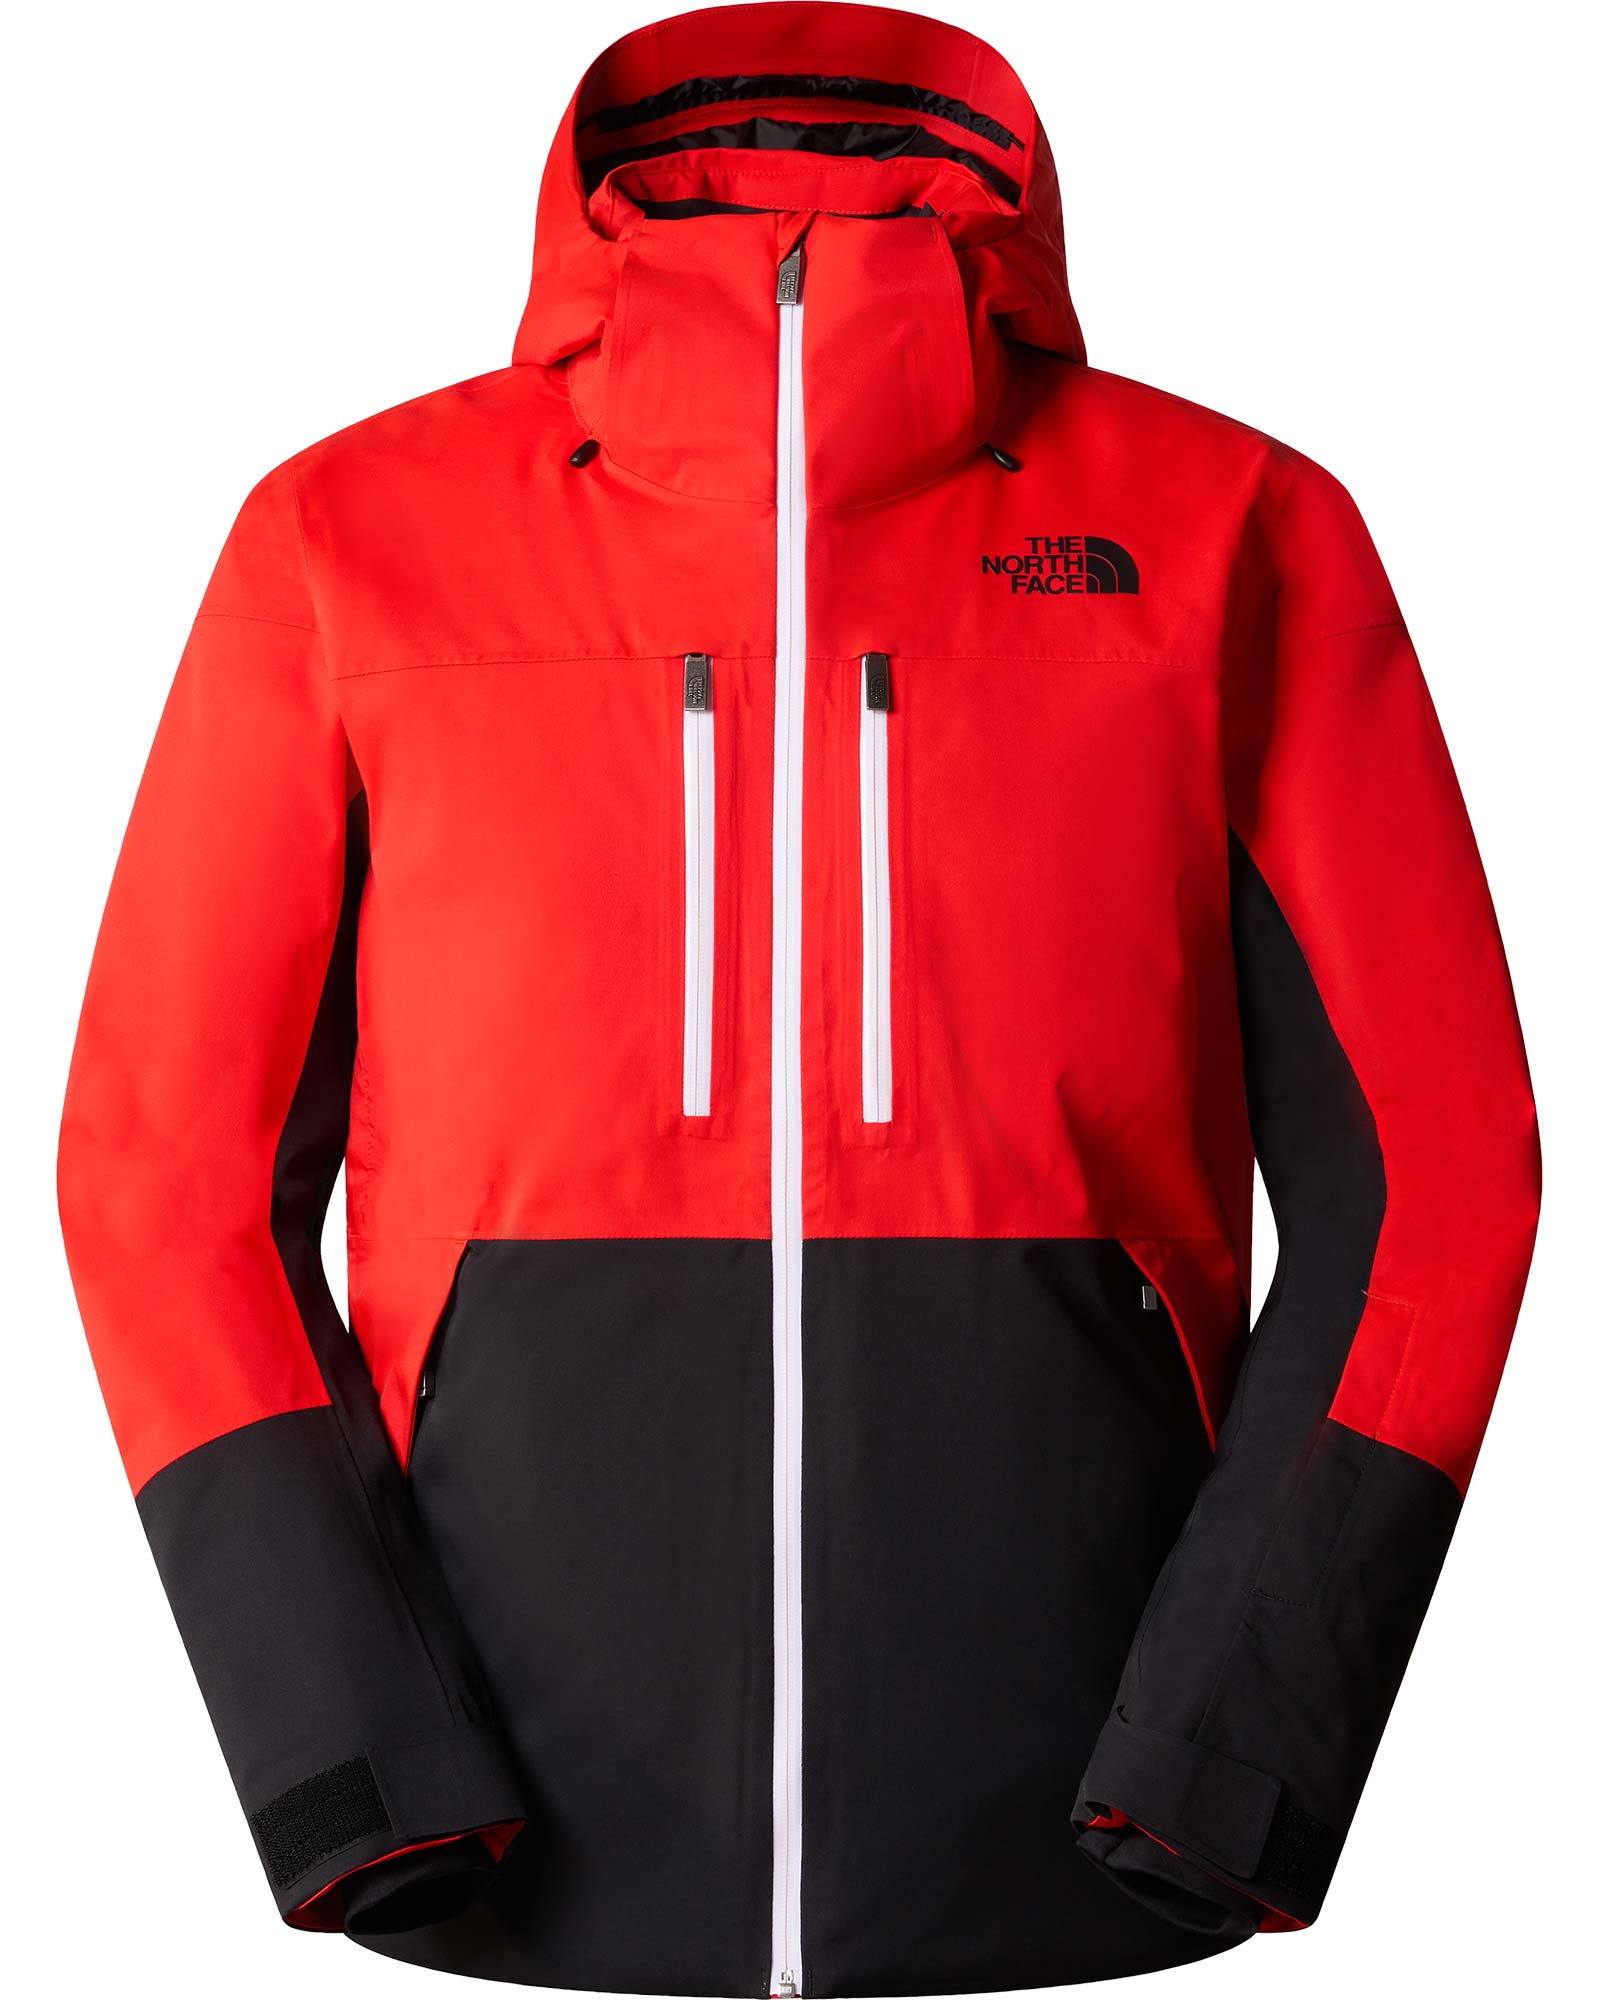 The North Face Chakal Men’s Jacket - Fiery Red/TNF Black XL